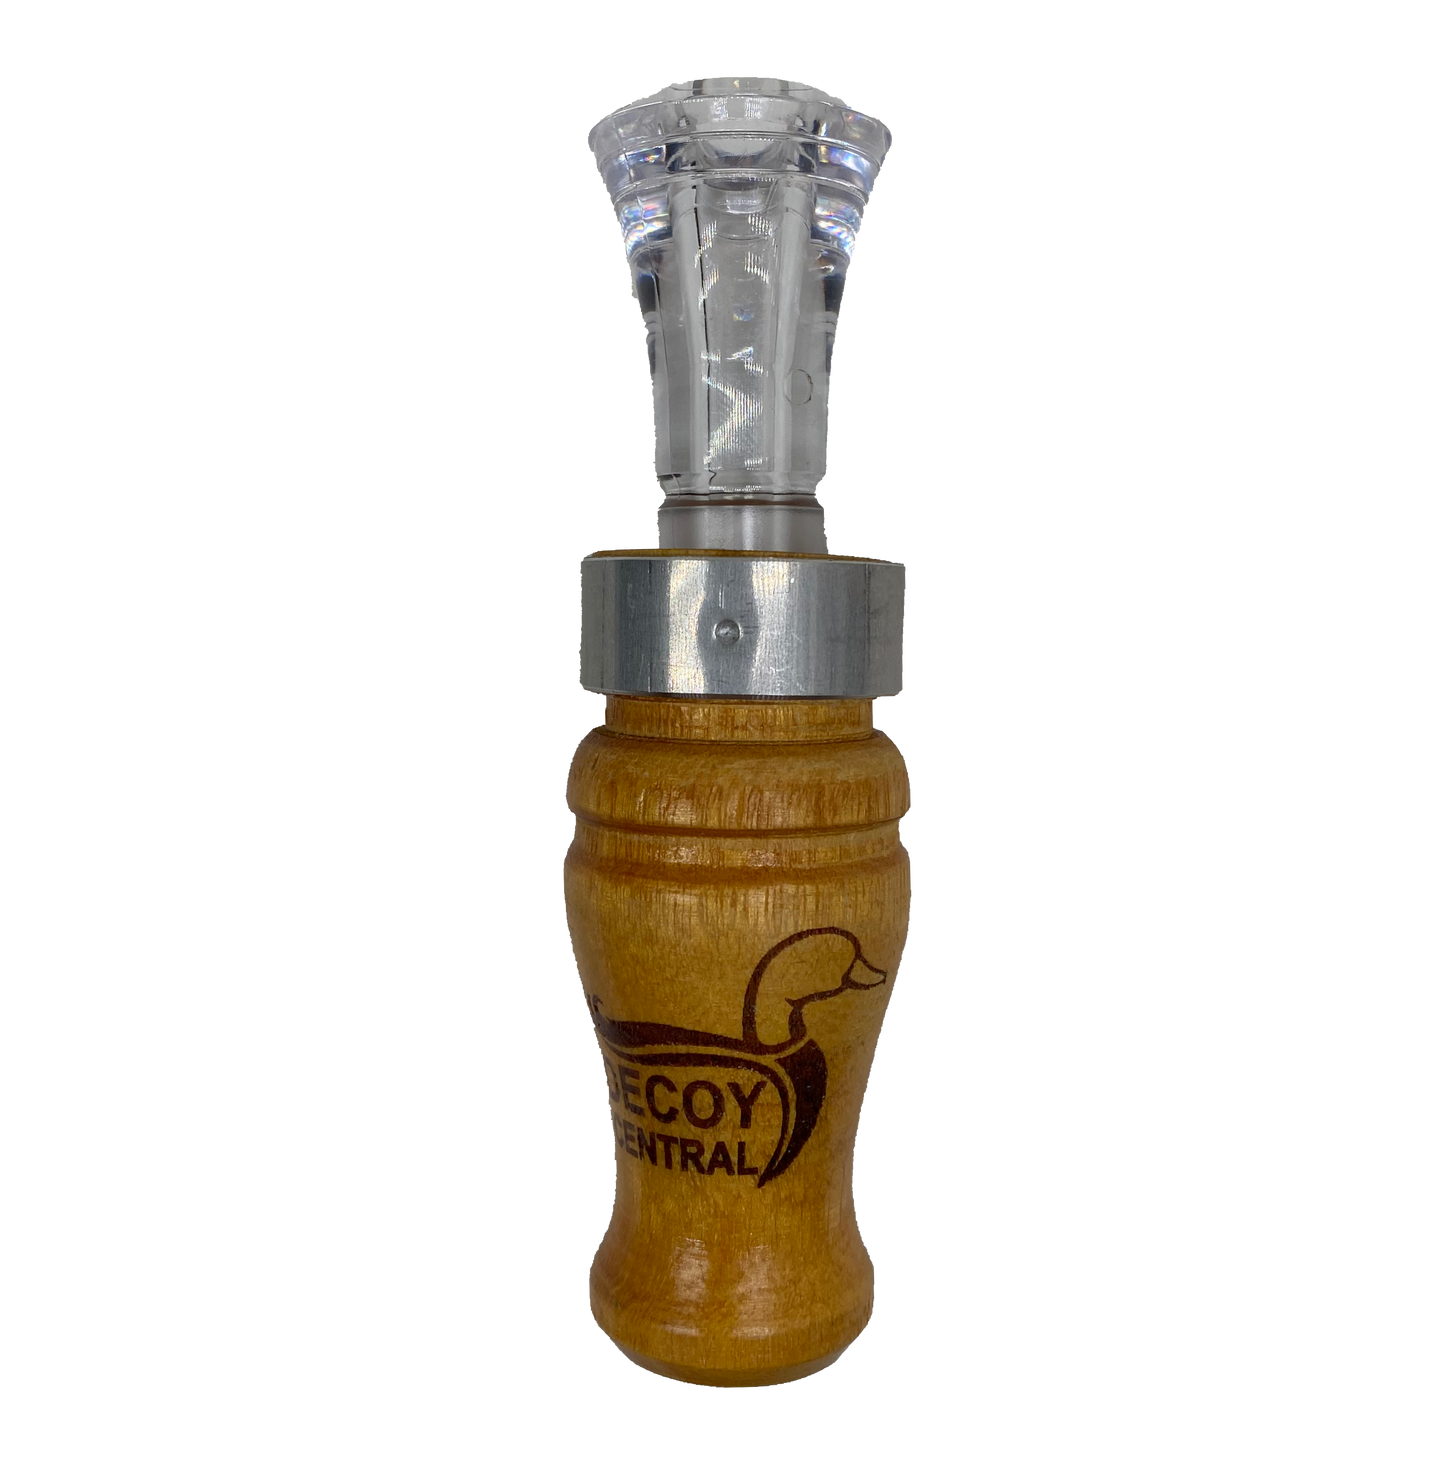 Decoy Central Open Water Duck Call